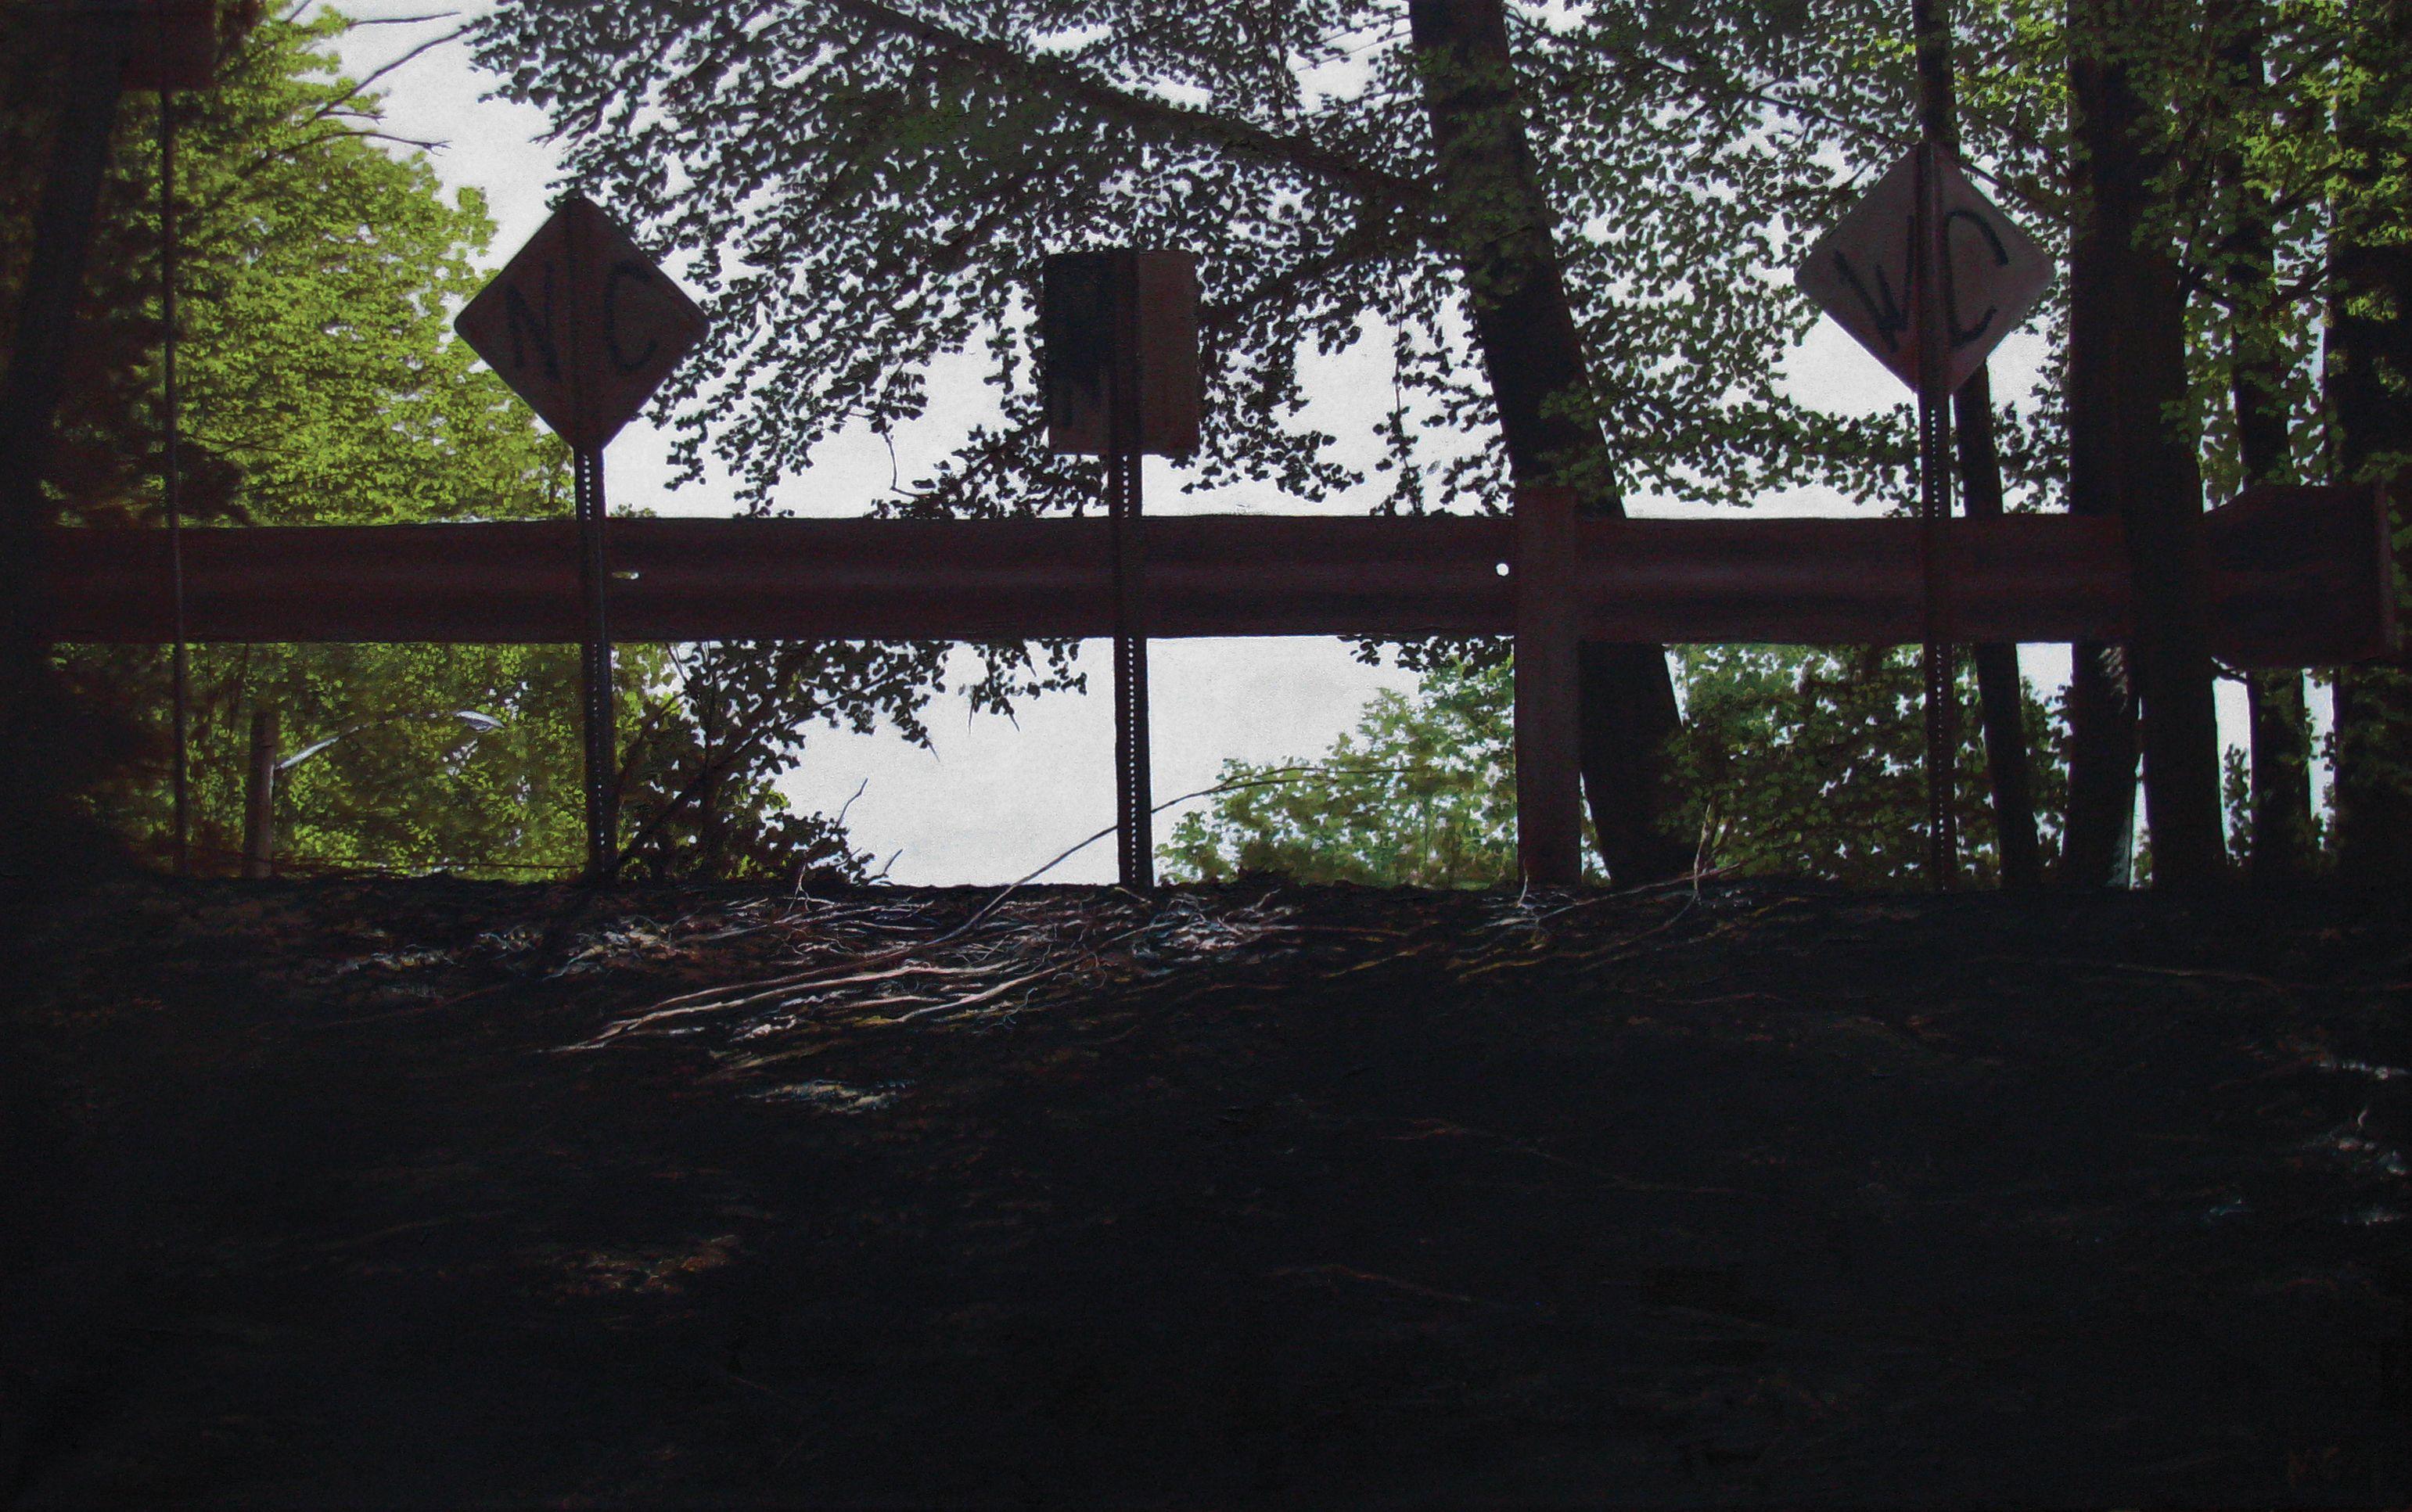 Splintered sunlight slipping through lush trees. Guard rail attempting to halt access.  :: Painting :: Photorealism :: This piece comes with an official certificate of authenticity signed by the artist :: Ready to Hang: Yes :: Signed: Yes ::